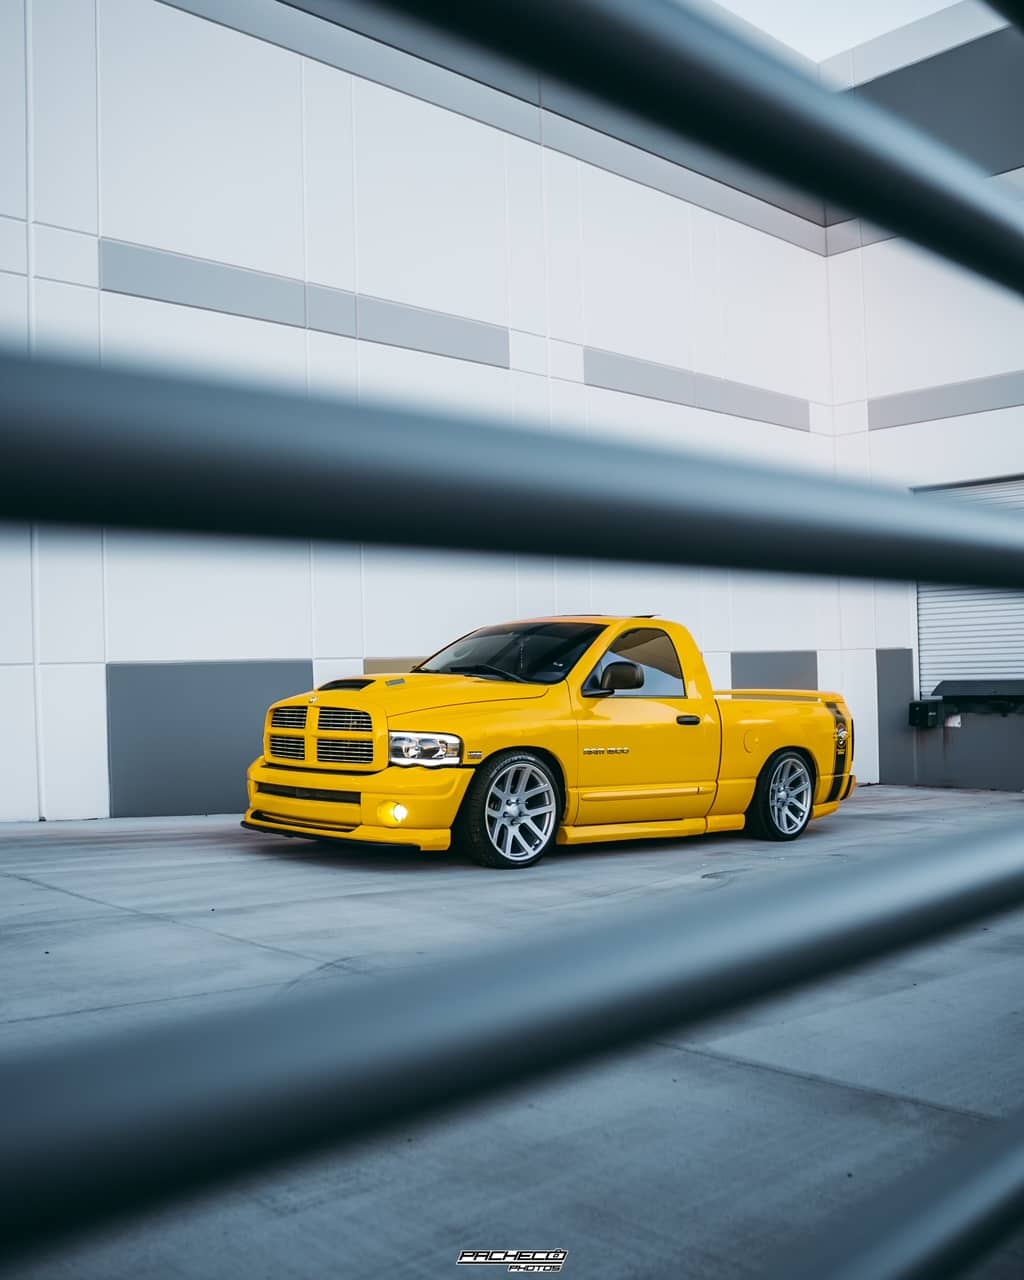 Dodge Ram SRT10 Performance truck in yellow with mods